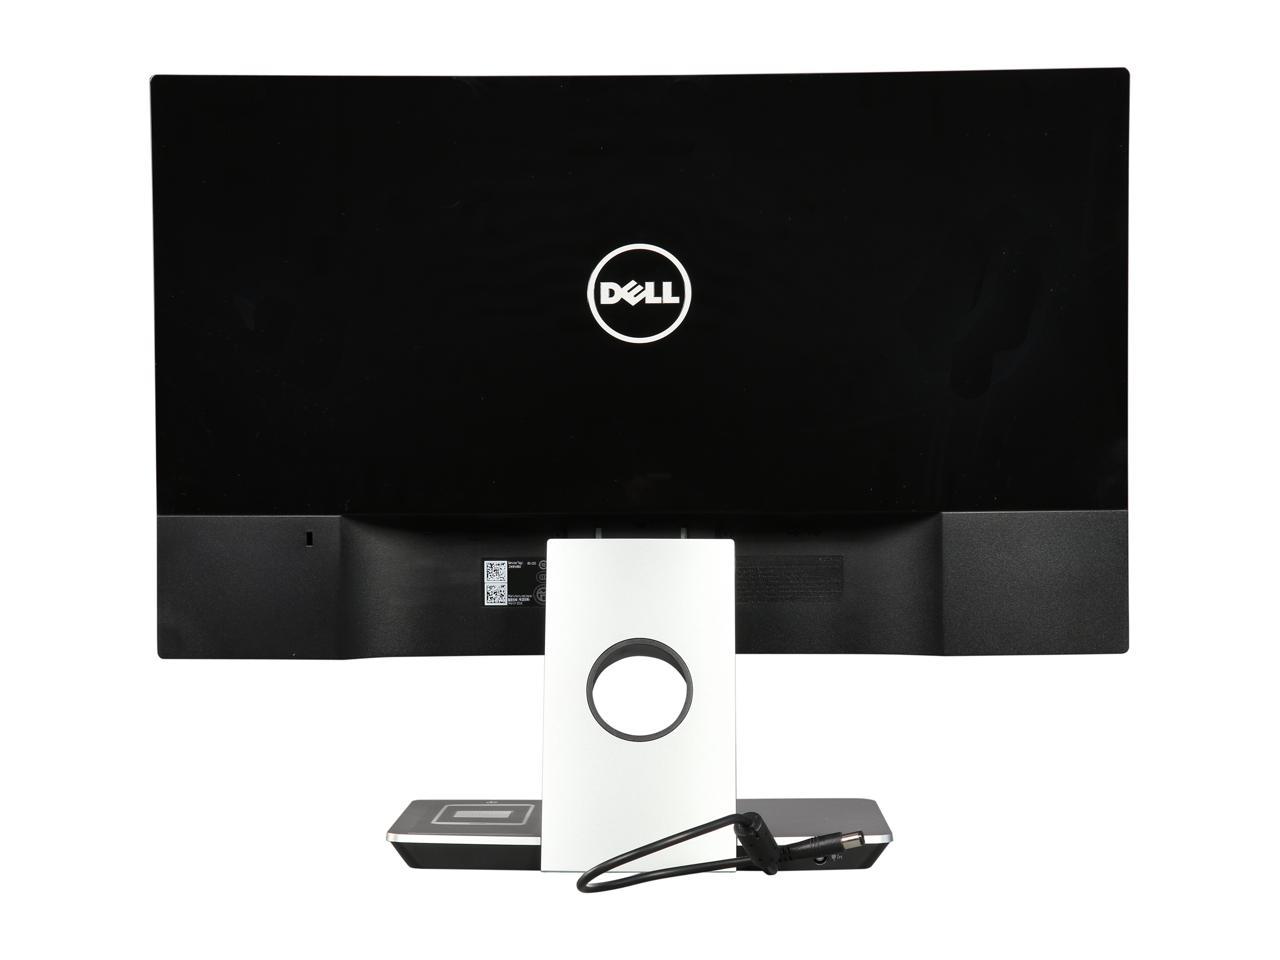 Dell S2317HWi Black 23" 6ms HDMI Widescreen LED Backlight LCD Monitor IPS 250 cd/m2 8,000,000:1 Built-in Speakers With Wireless Smart Phone Charing Stand